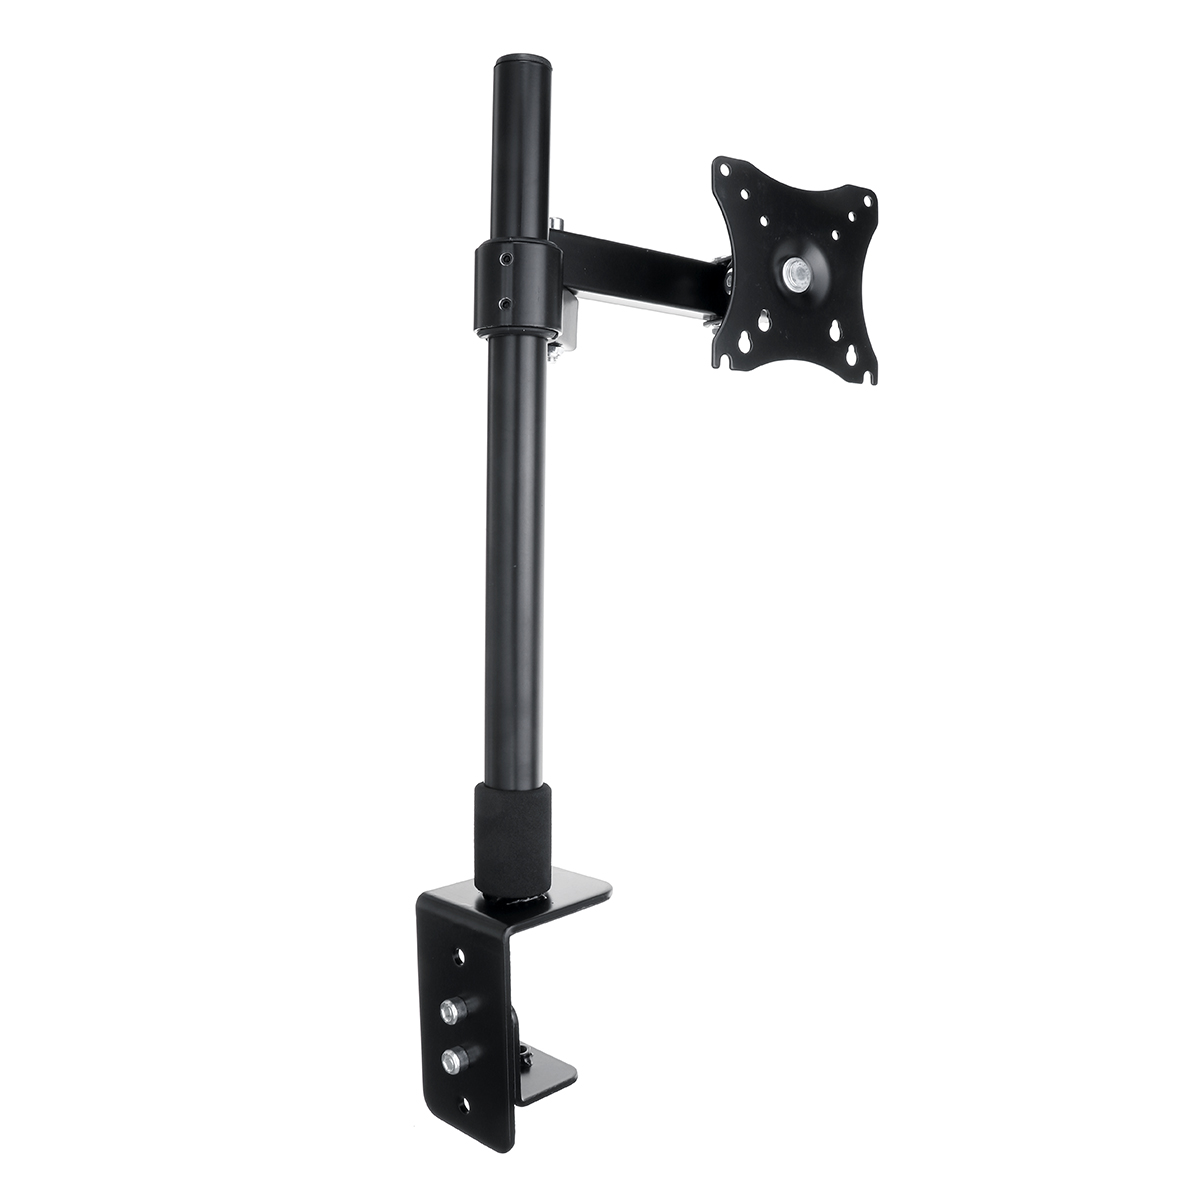 Single-Arm-Desk-Mount-LCD-Computer-Monitor-Bracket-Clamp-Stand-14-27-inch-Screen-TV-Bracket-1900409-4